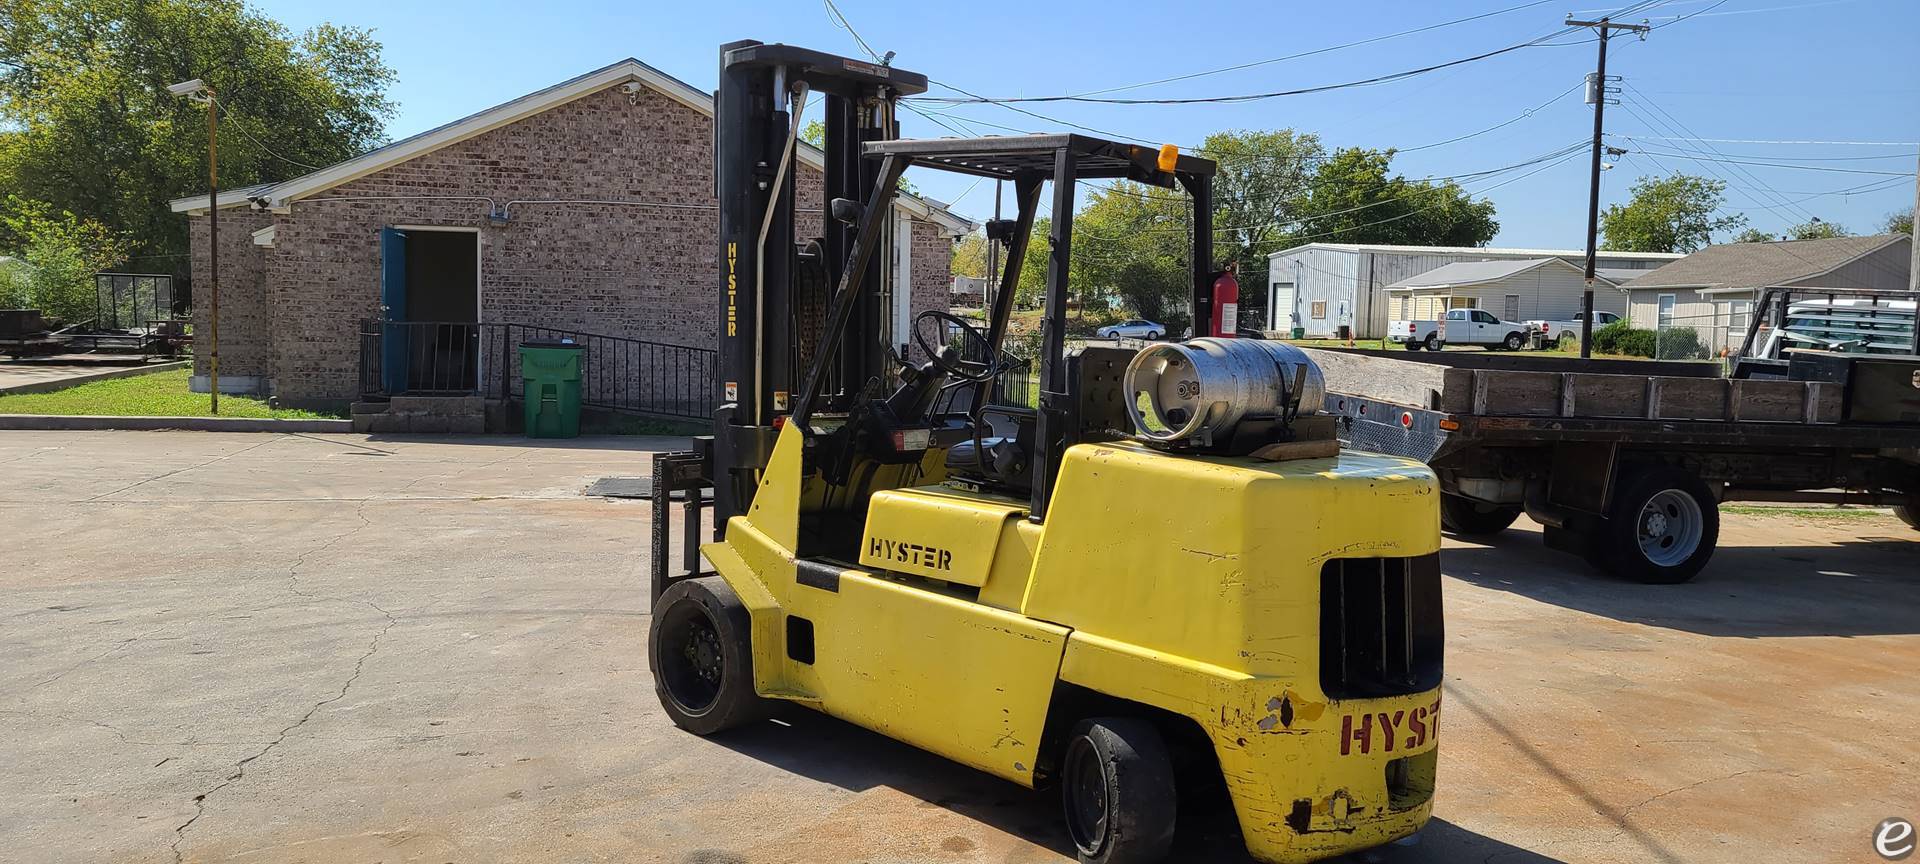 1992 Hyster S120XL